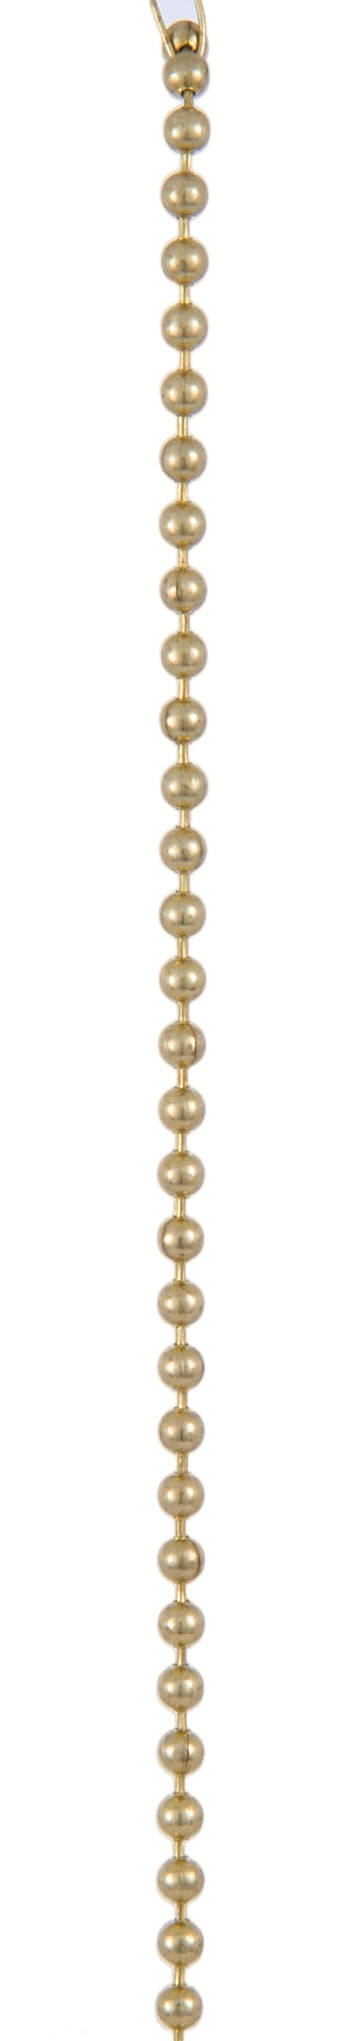 Brass Beaded Chain #6 Size